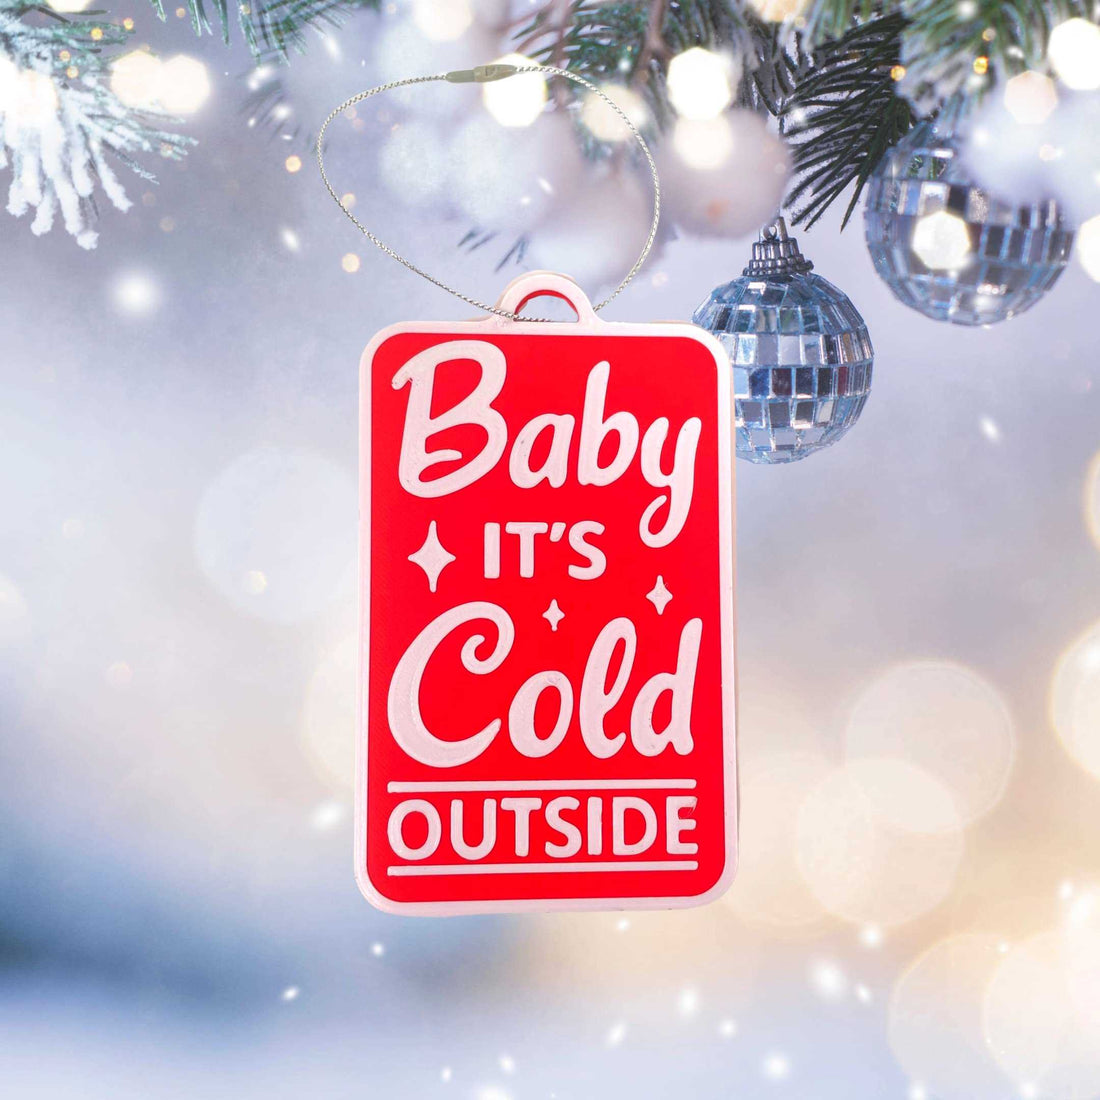 Baby It's Cold Outside Christmas Ornament - Decorative Holiday Ornament - Made in The USA